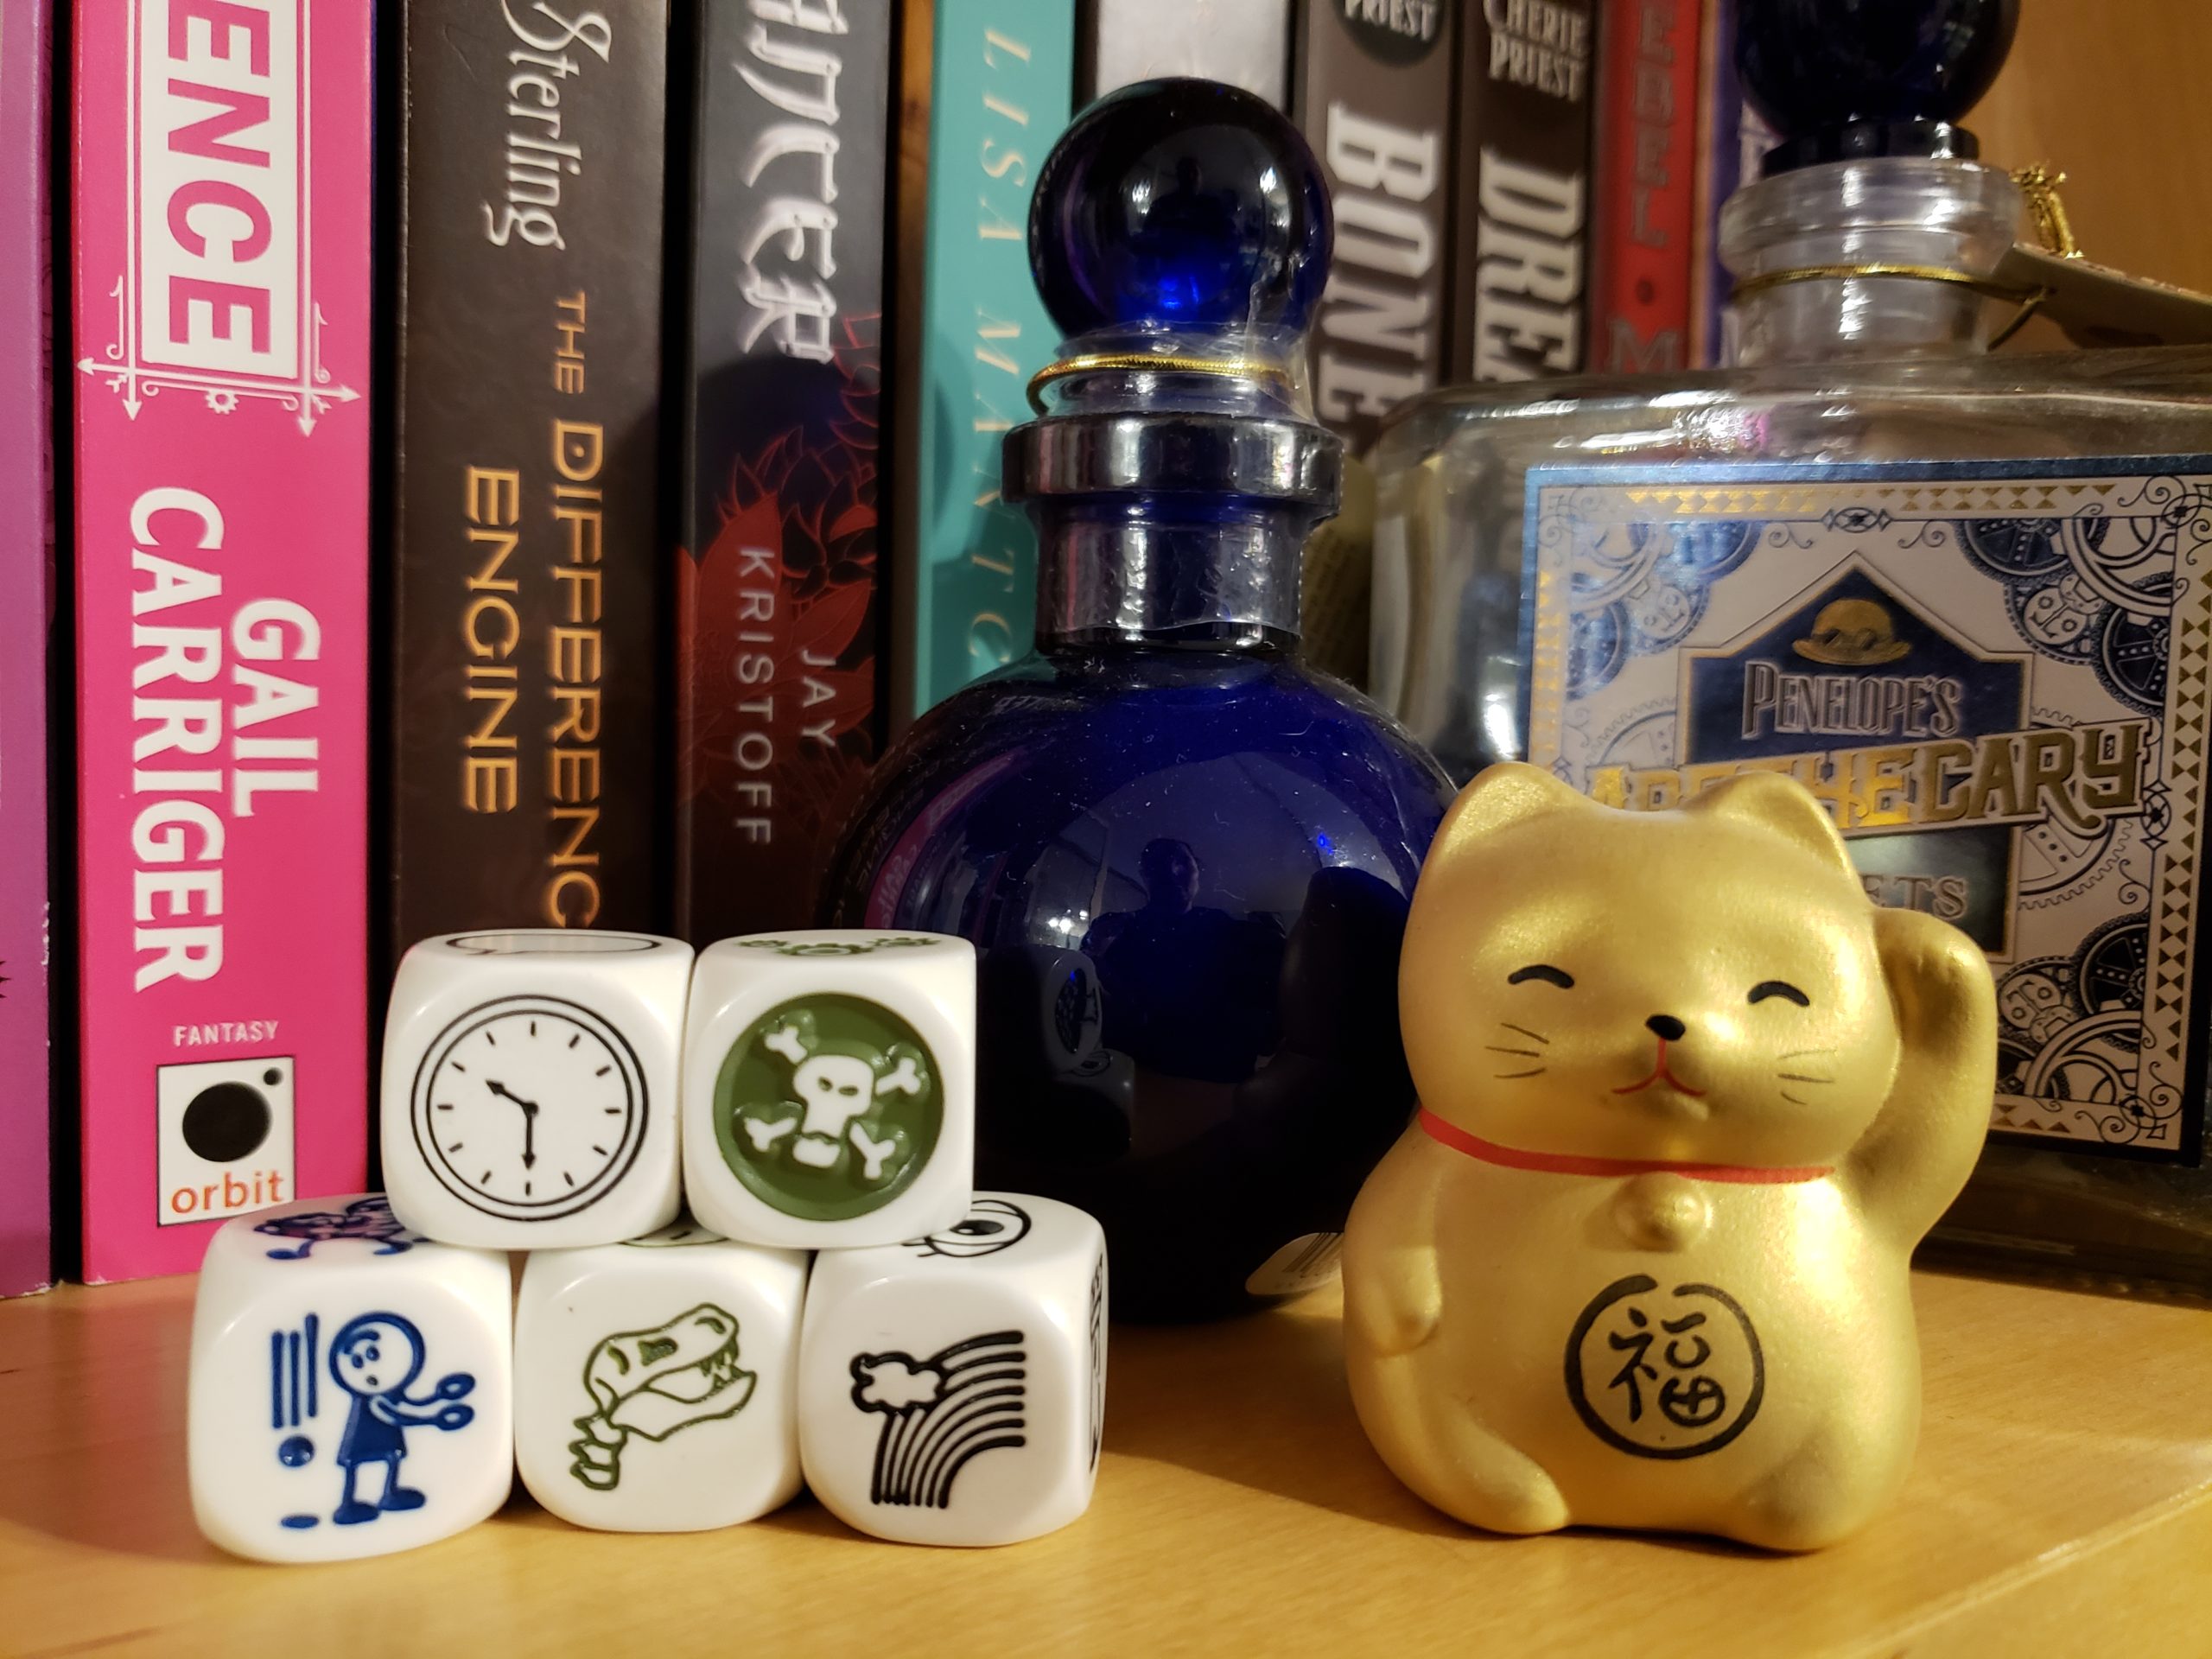 Five of Rory's Story Cubes displaying pictures of a clock, a skull and crossbones, an object falling beside a person, a dinosaur skeleton, and a rainbow.